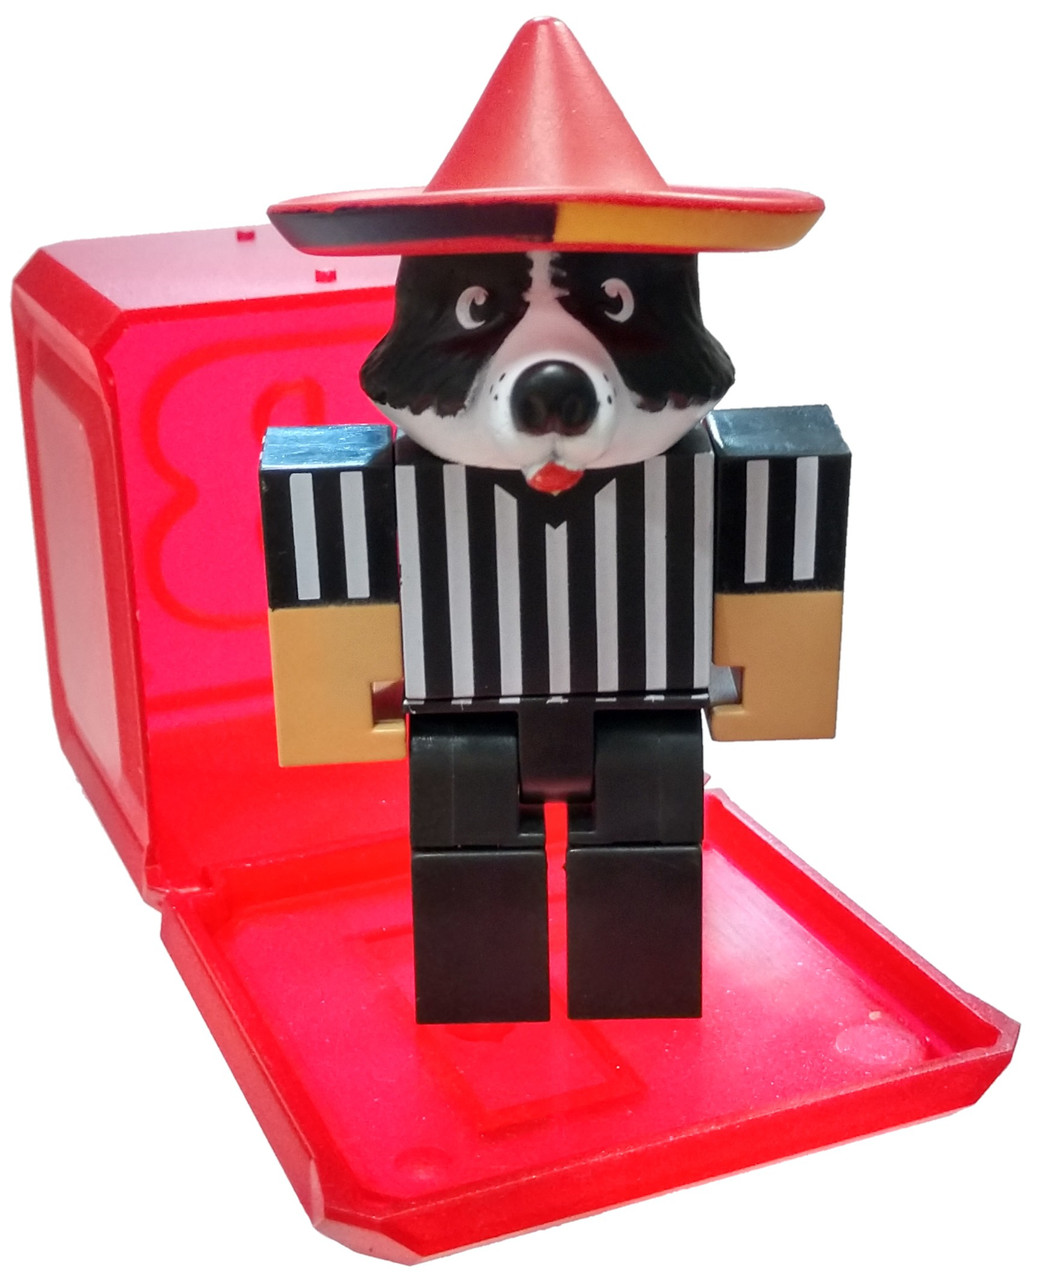 Roblox Celebrity Collection Series 5 High School Life Referee 3 Mini Figure With Red Cube And Online Code Loose Jazwares Toywiz - promo codes for high school life roblox 2020 may